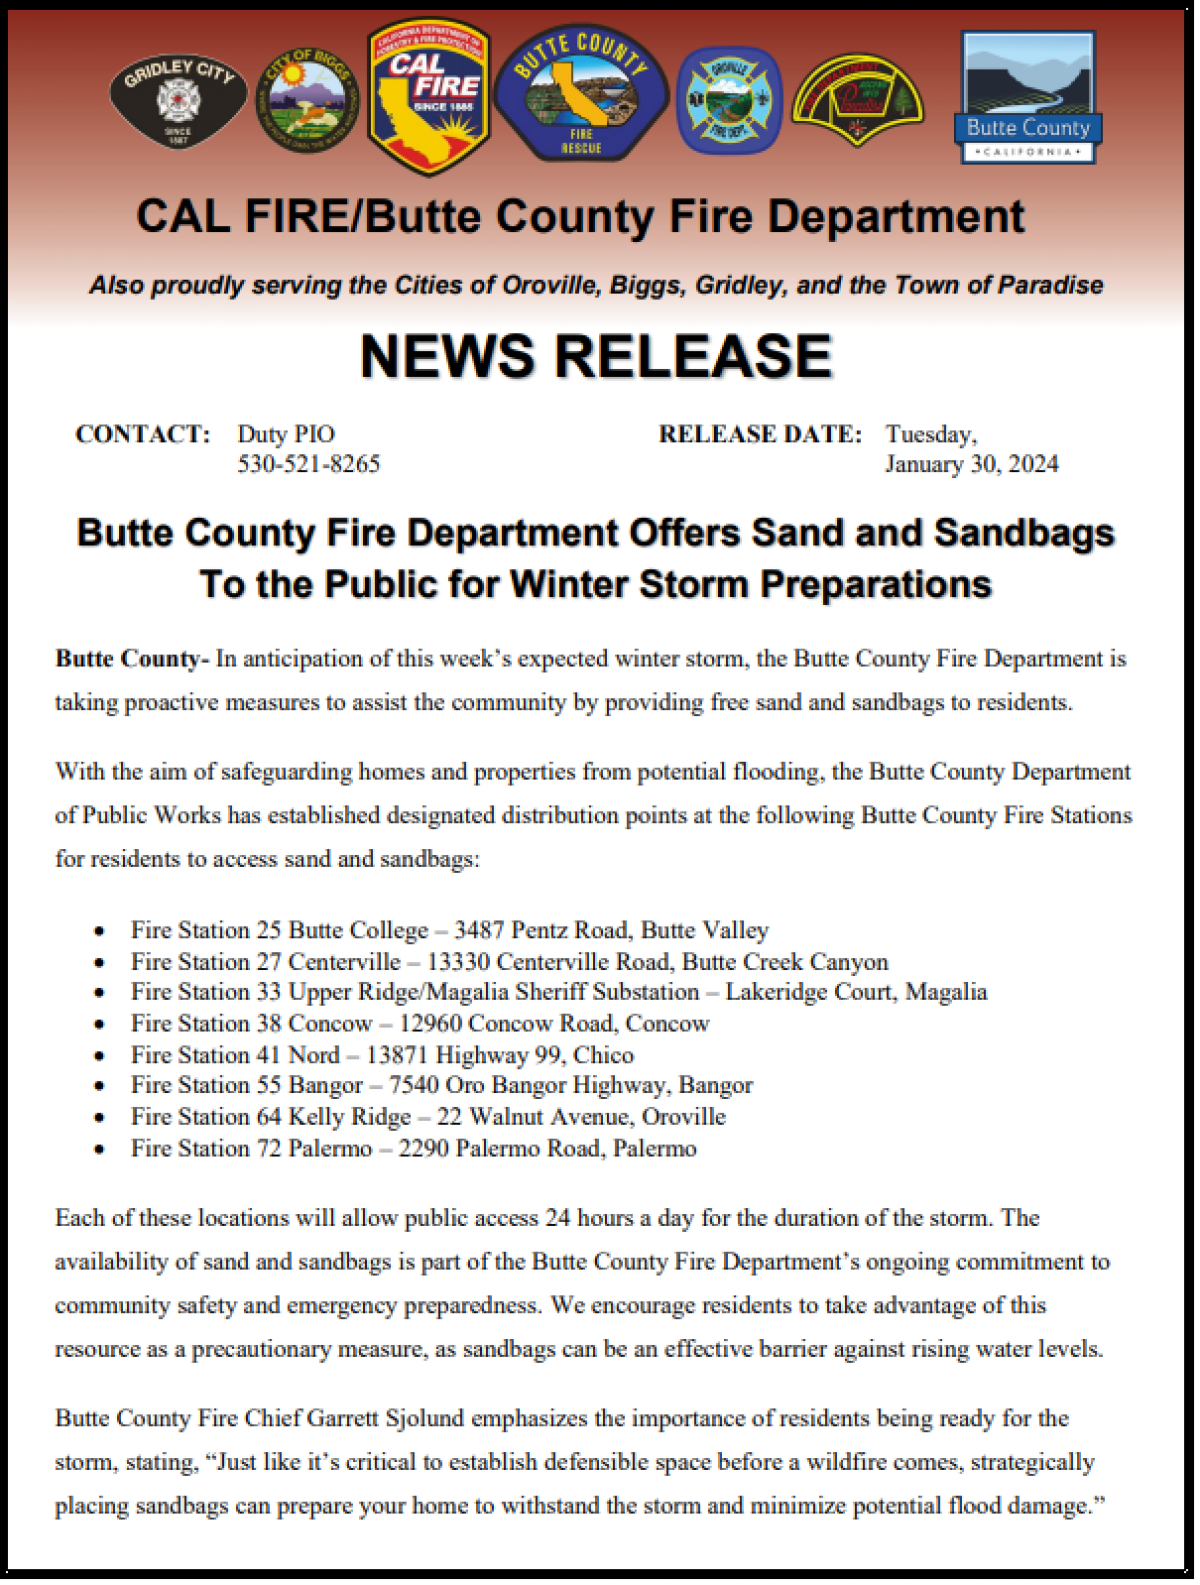 Informational flyer regarding sandbags and where to get them in the event of a winter storm